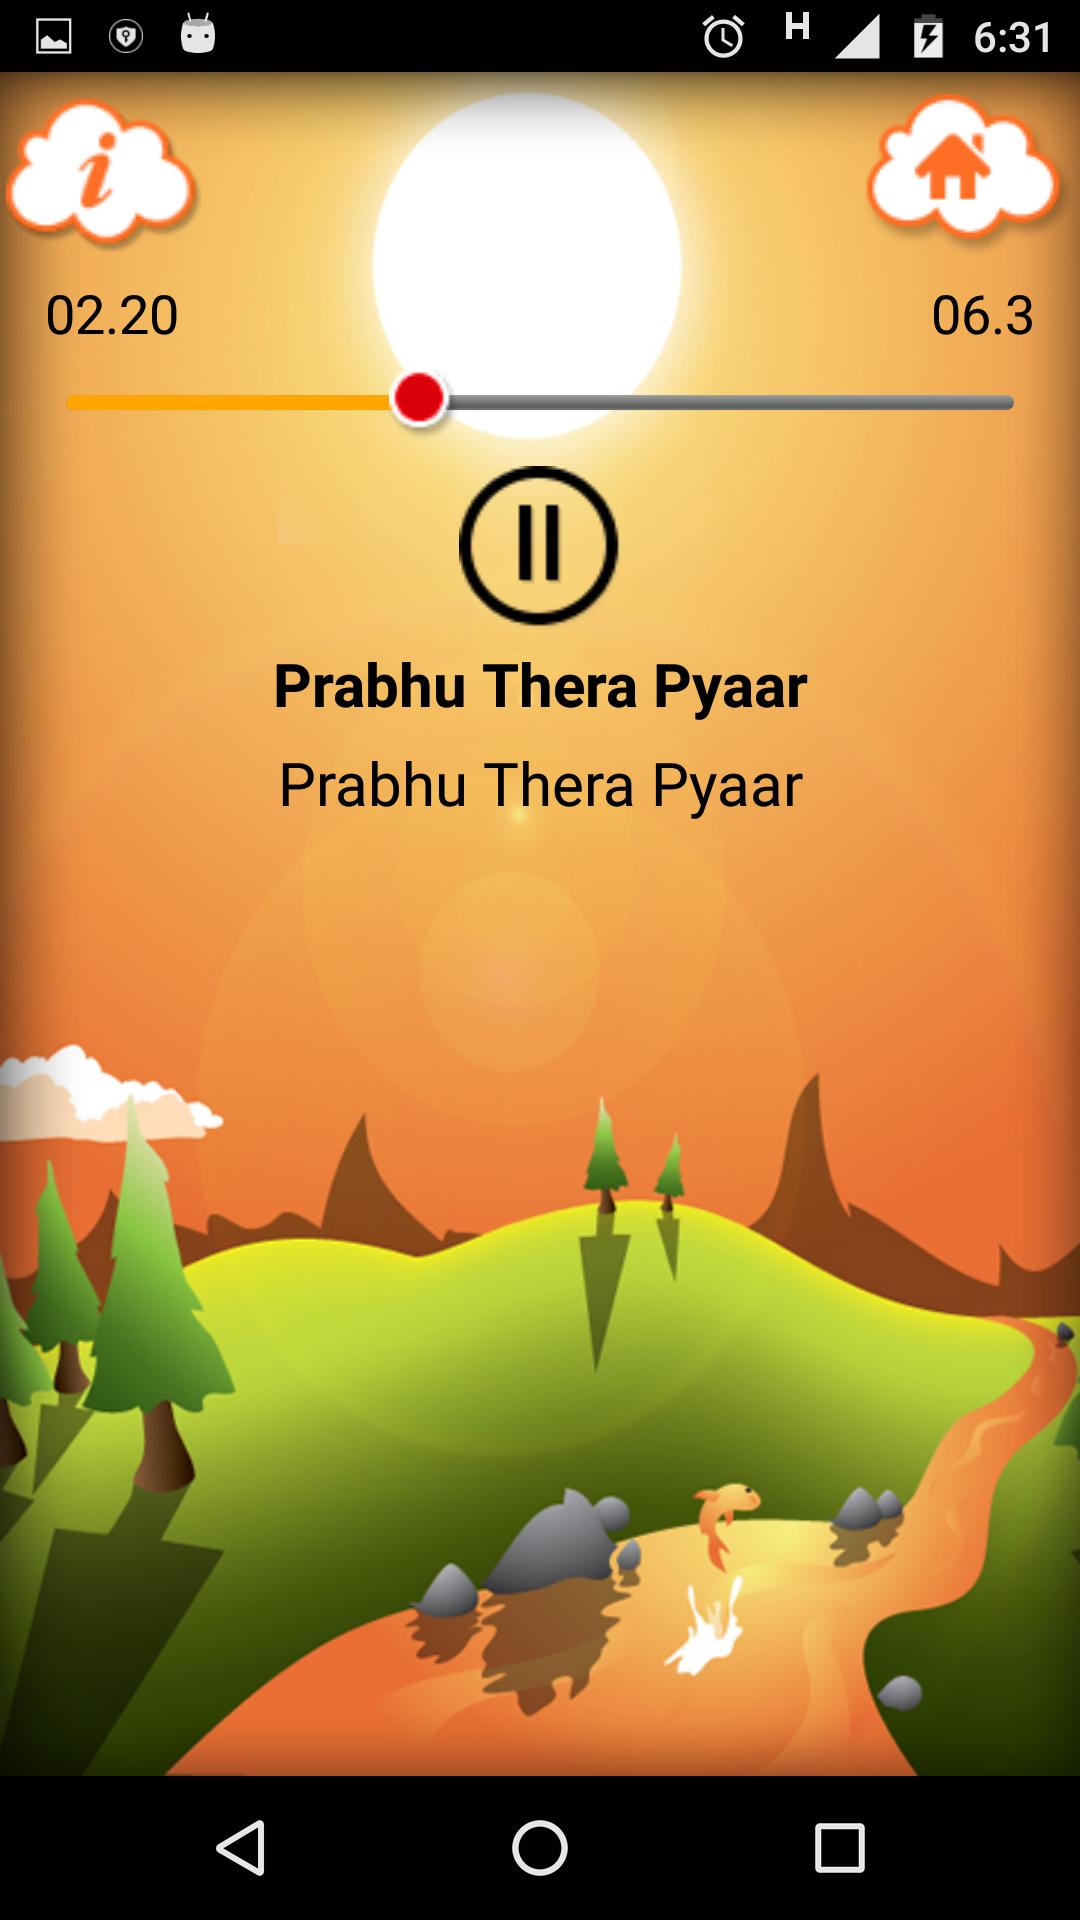 Jesus Songs In Hindi for Android - APK Download